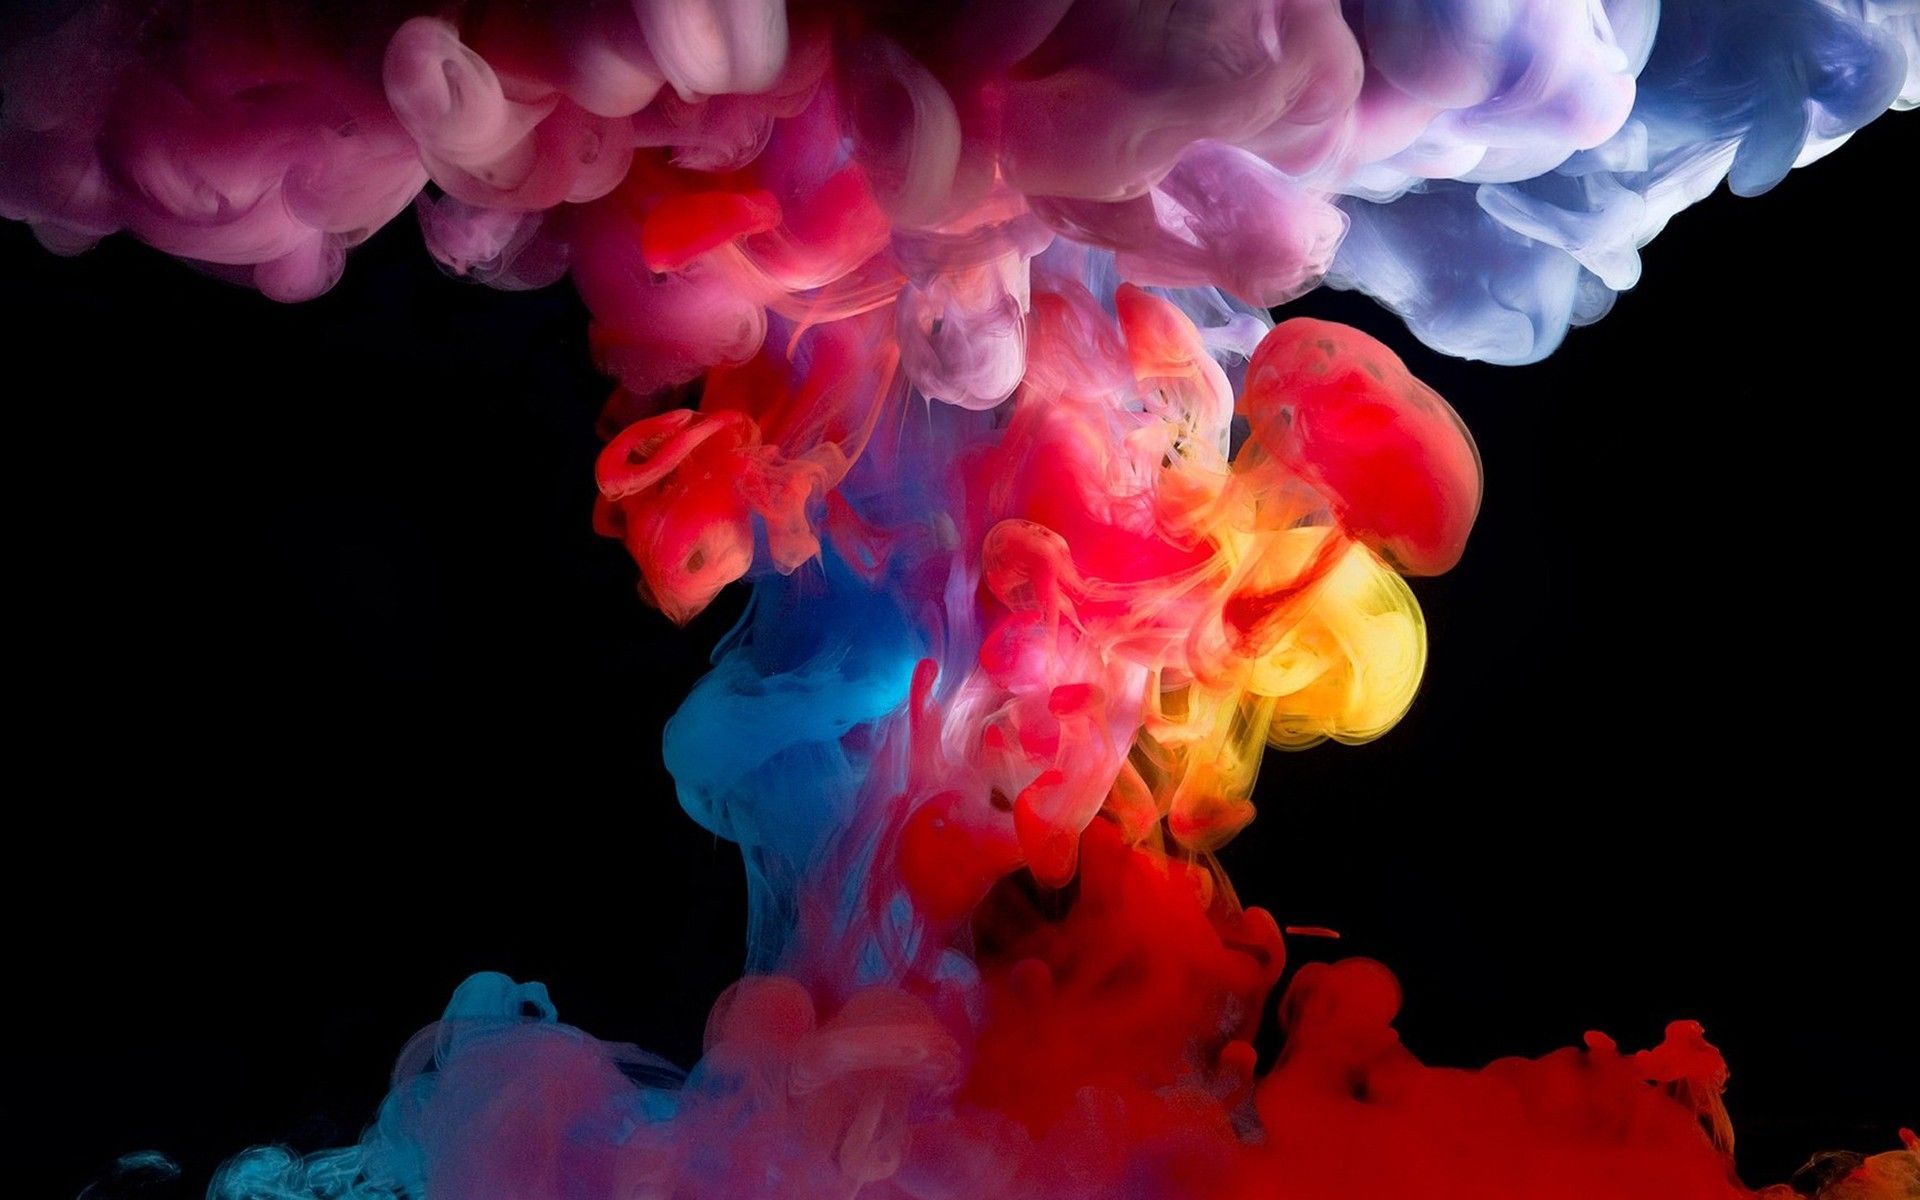 black background, #smoke, #paint in water, #simple background, #colorful, # painting, #digital art, wallpaper. Smoke wallpaper, Smoke painting, Colored smoke